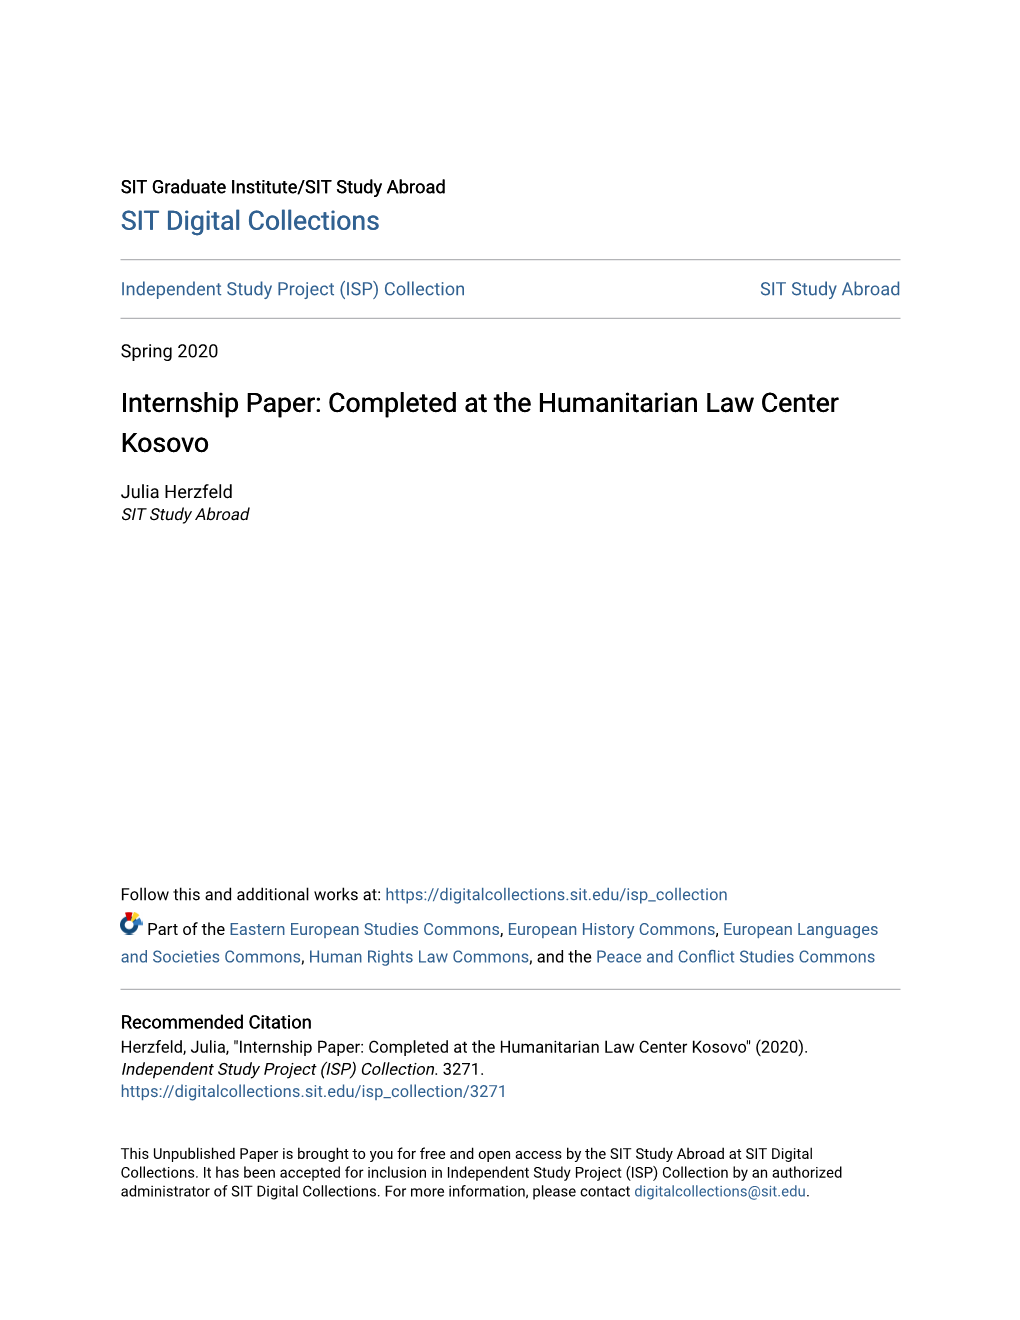 Internship Paper: Completed at the Humanitarian Law Center Kosovo